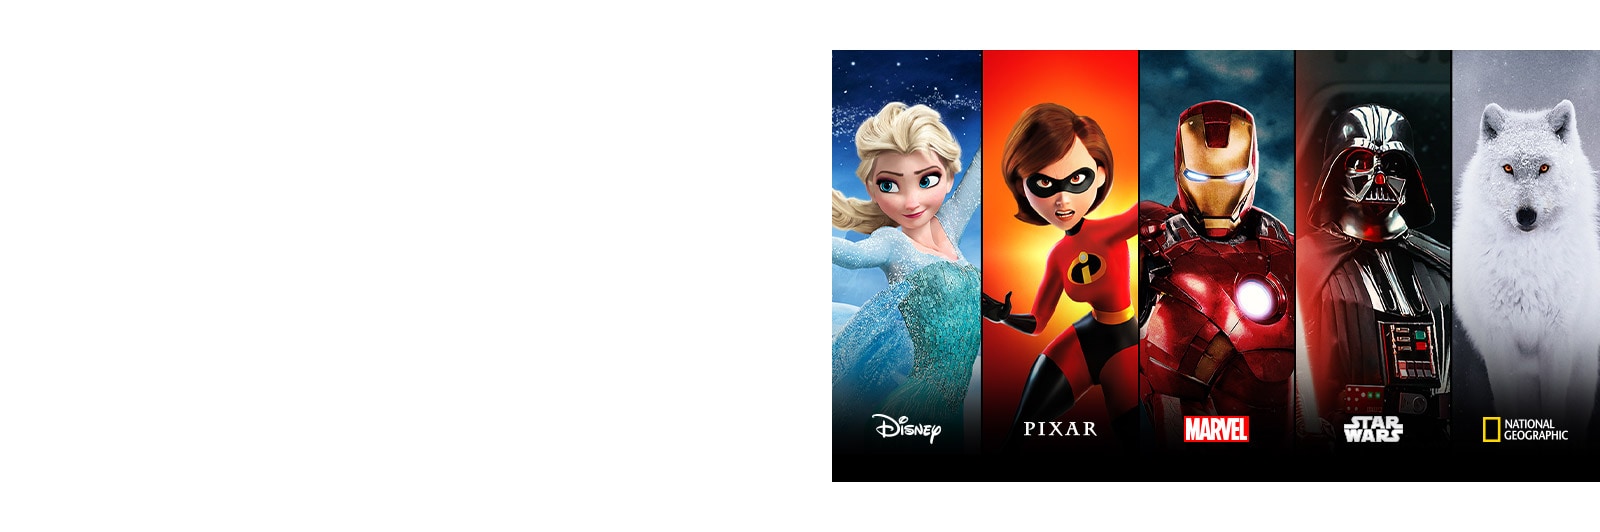 Disney Frozen, Pixar Incredibles, Marvel Iron Man, Star Wars, and National Geographic title cards